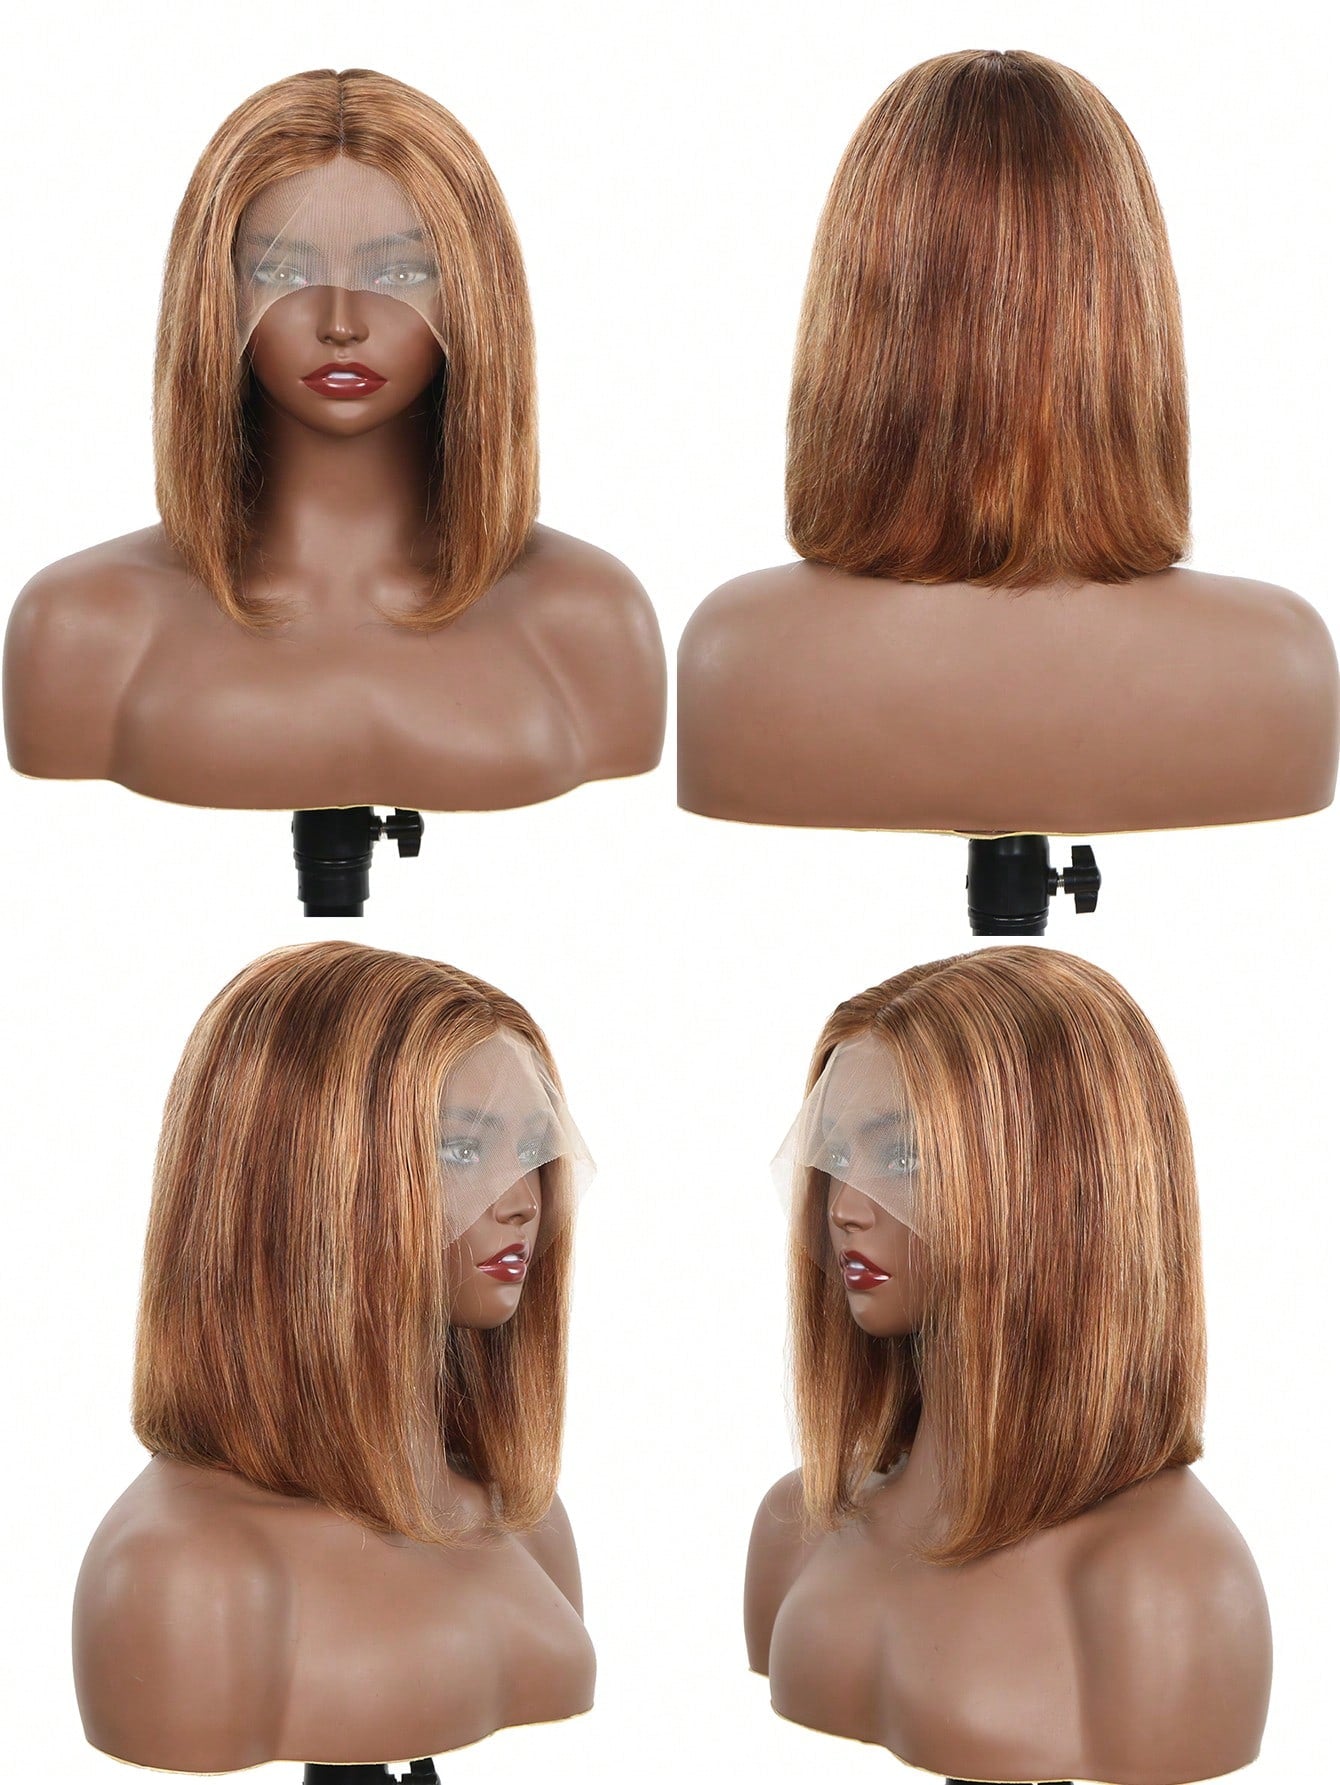 Short Bob Wig P4/27 Wigs T Part Transparent Lace Wig For Women Highlight On Clearance Seal